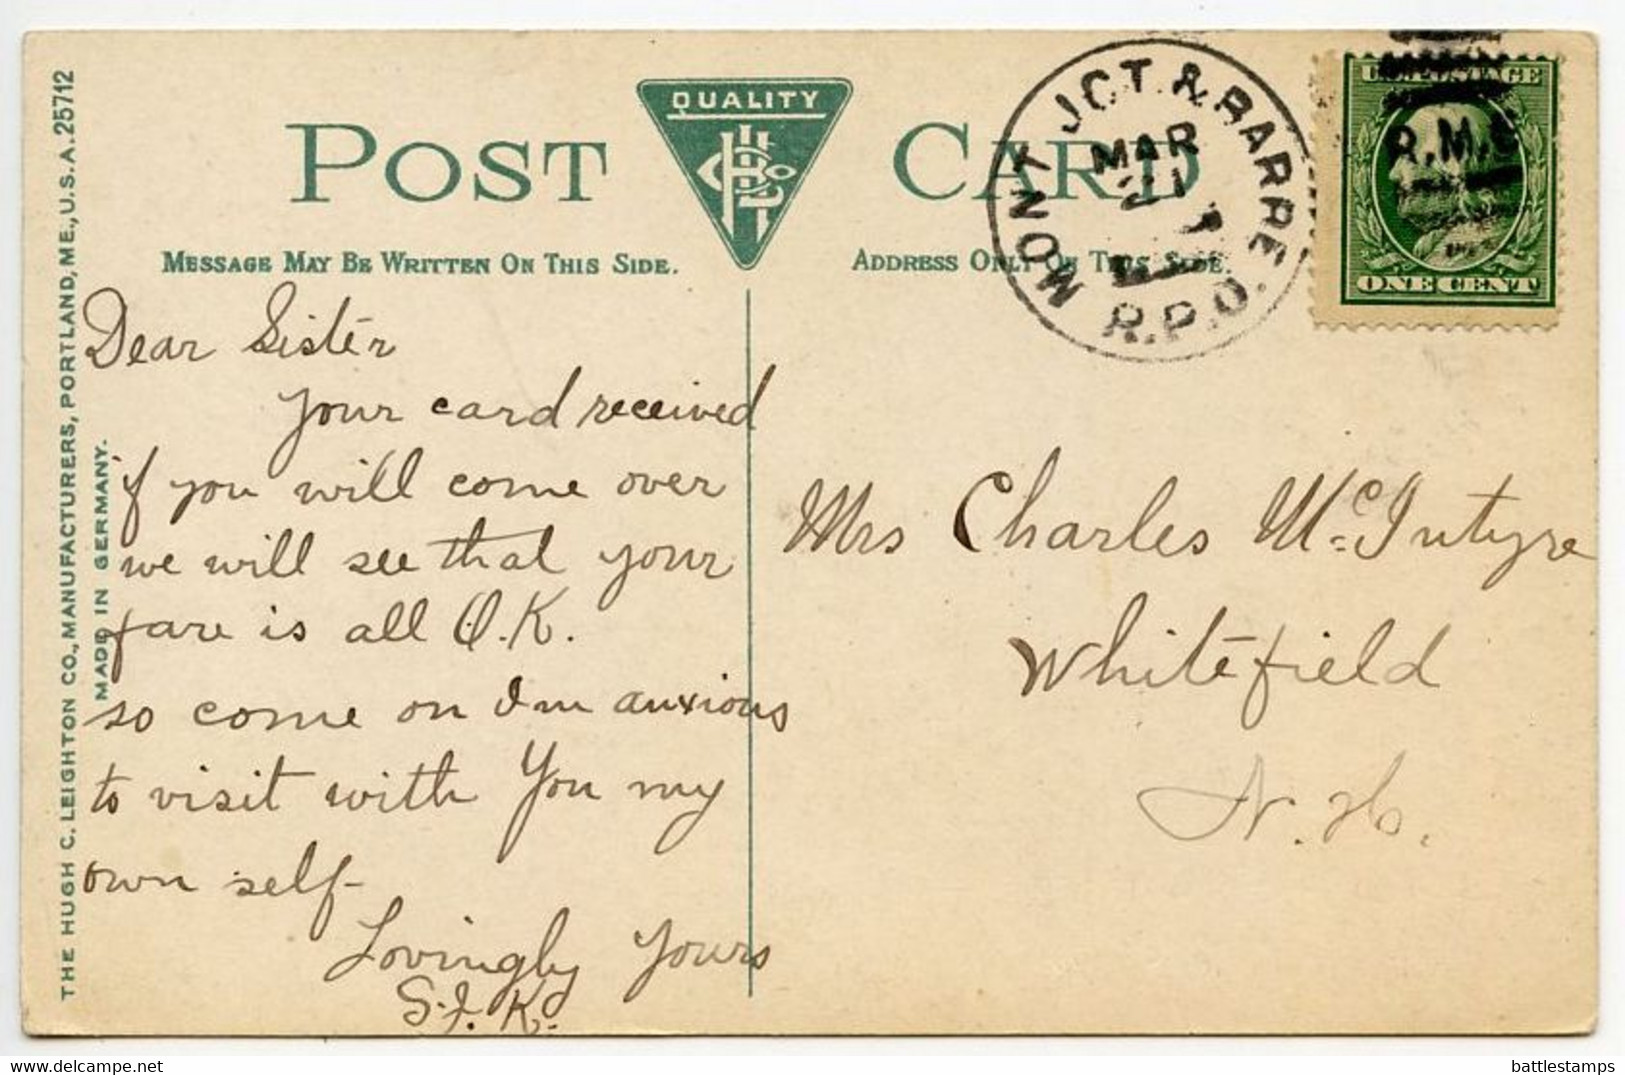 United States 1910's Postcard Barre, Vermont - Wells And Lampson Quarry; Mont. Jct. & Barre RPO Postmark - Barre